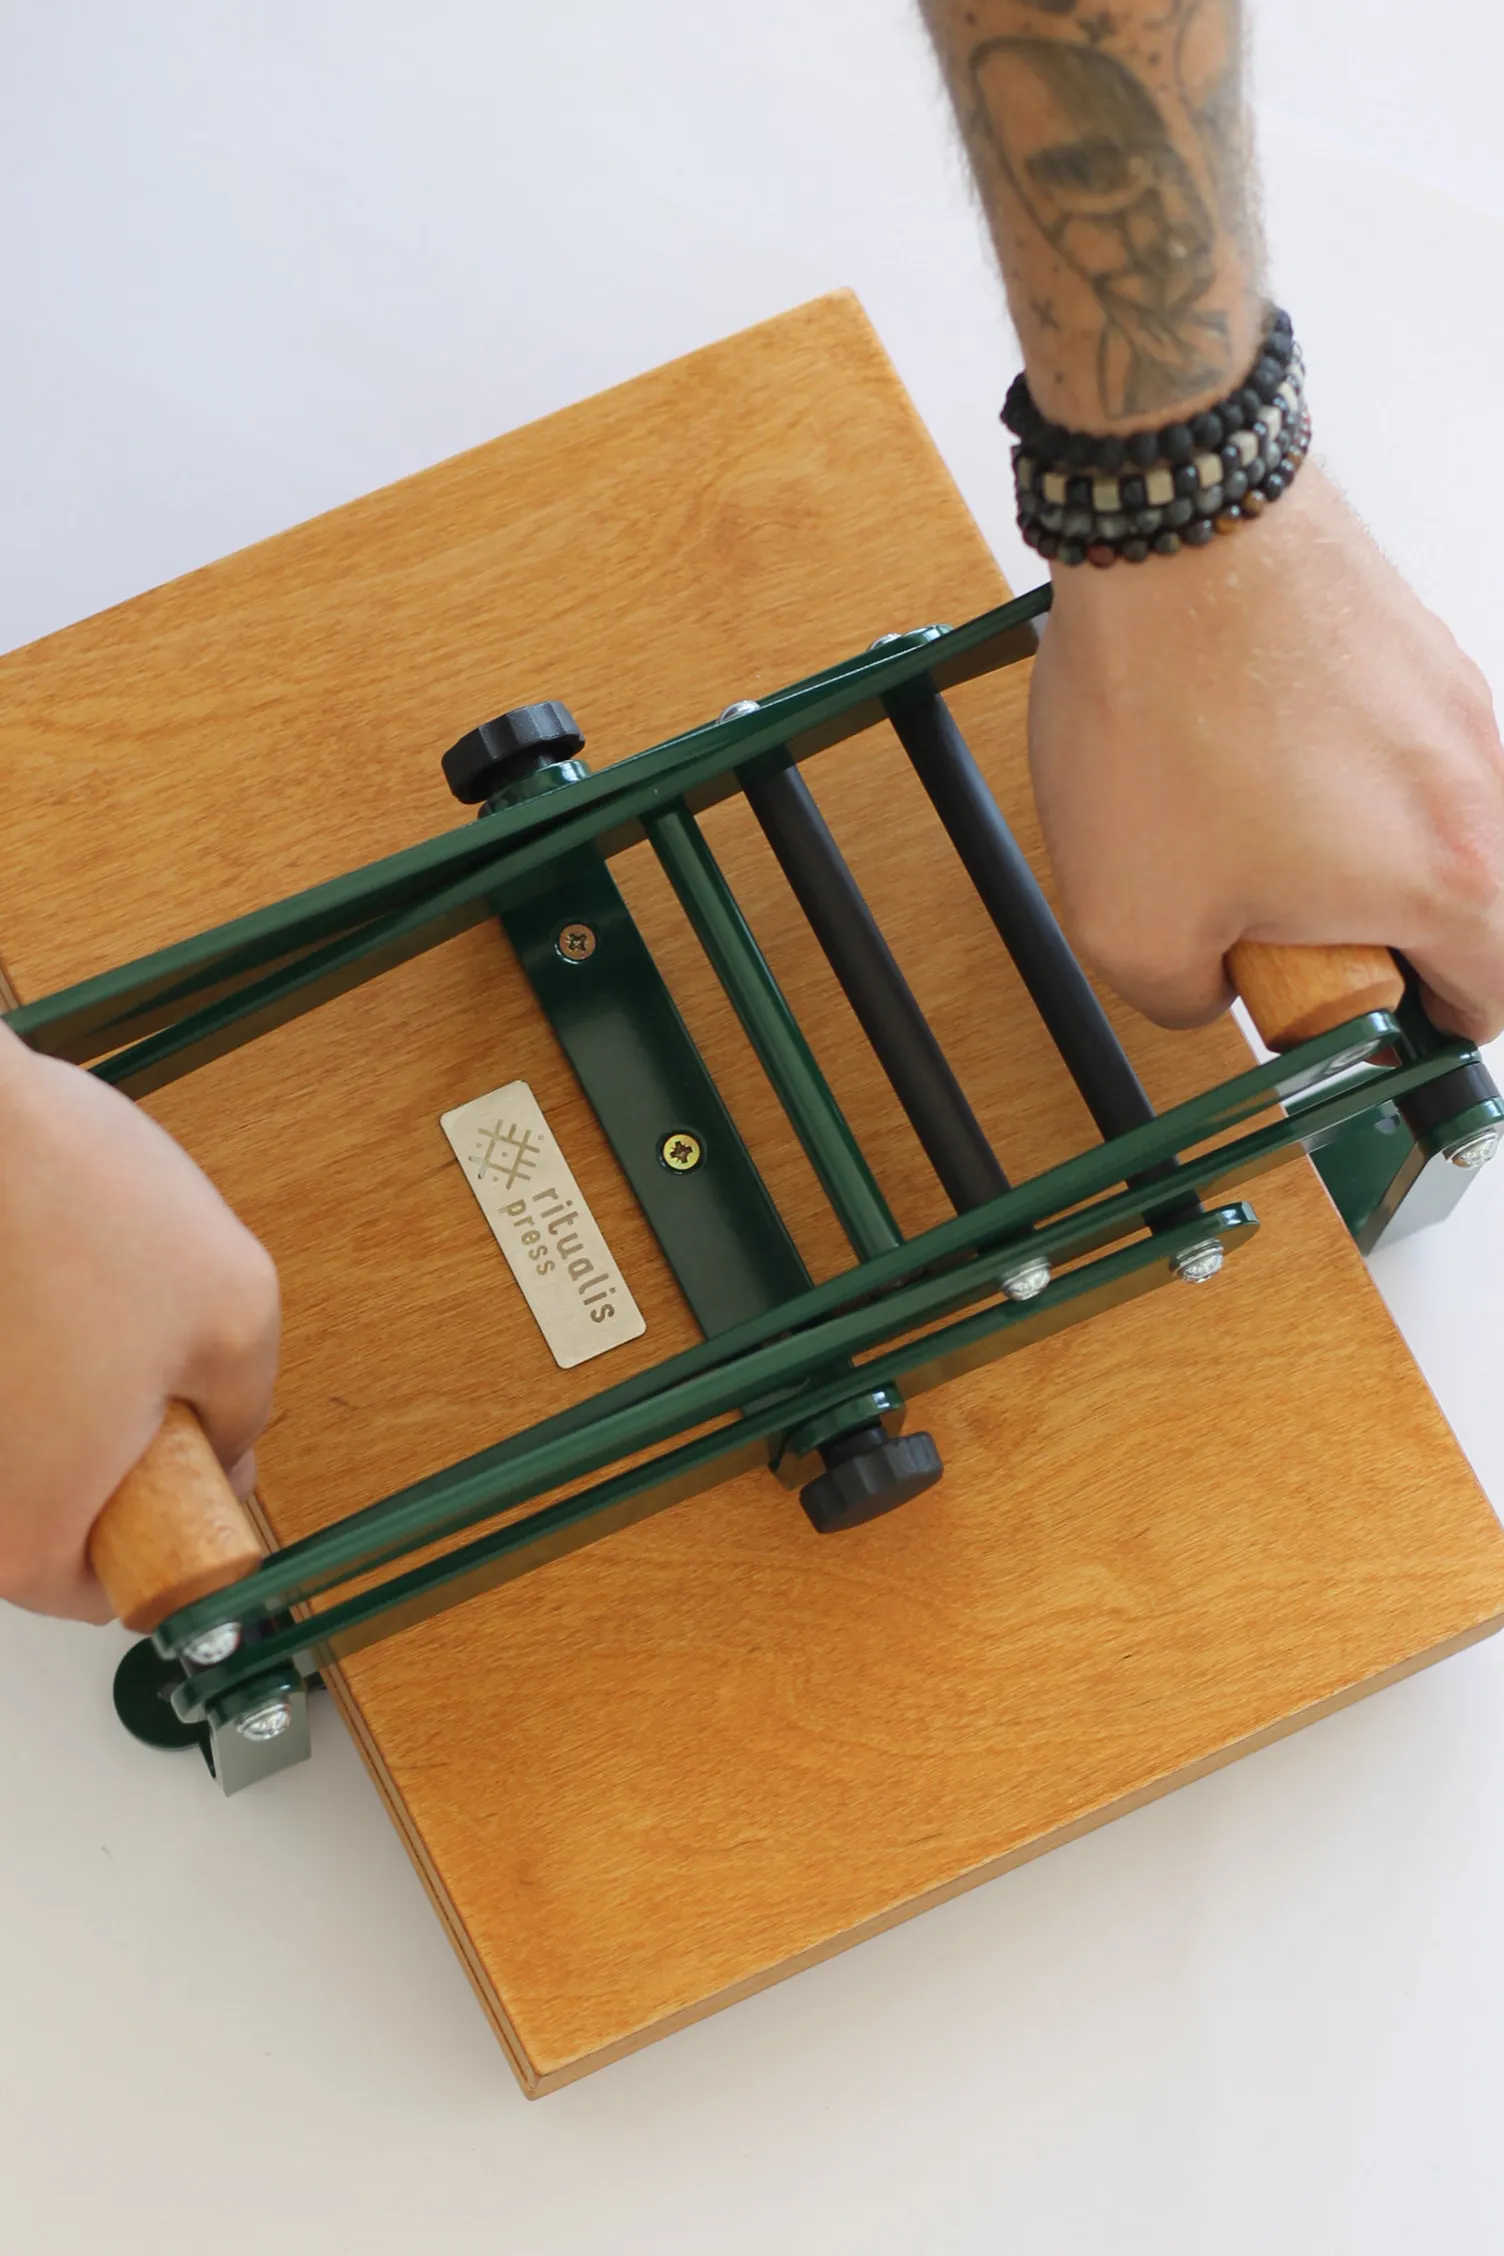 Two levers of wooden linocut printing press by Ritualis Press that are used to easily lean on the press with both hands.